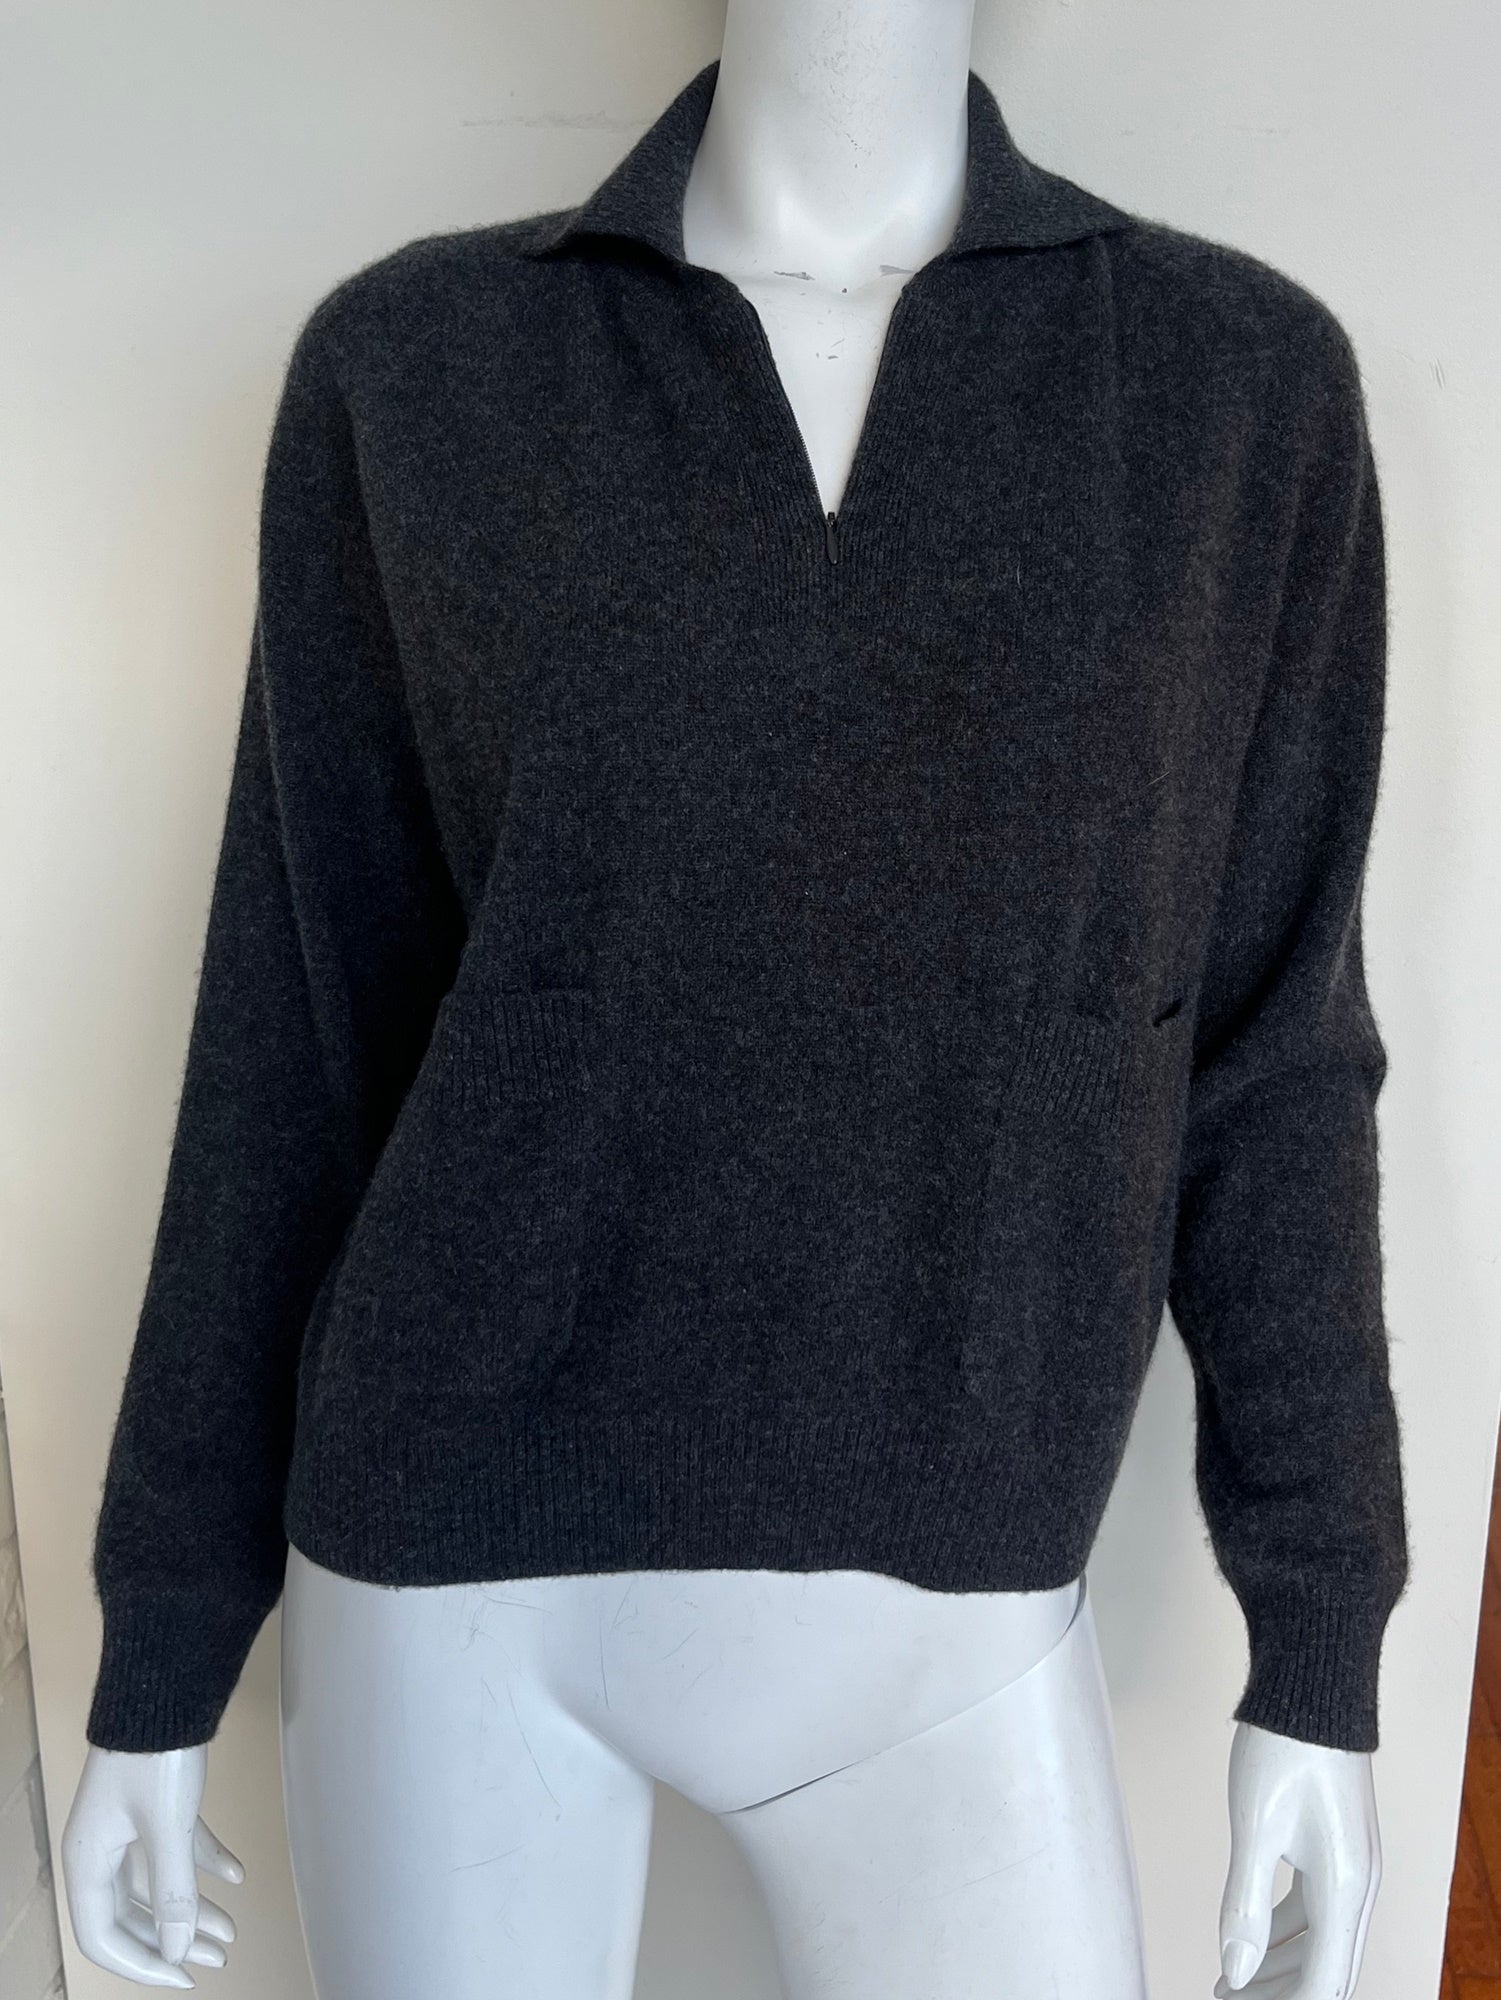 Cashmere Polo Sweater Size Small